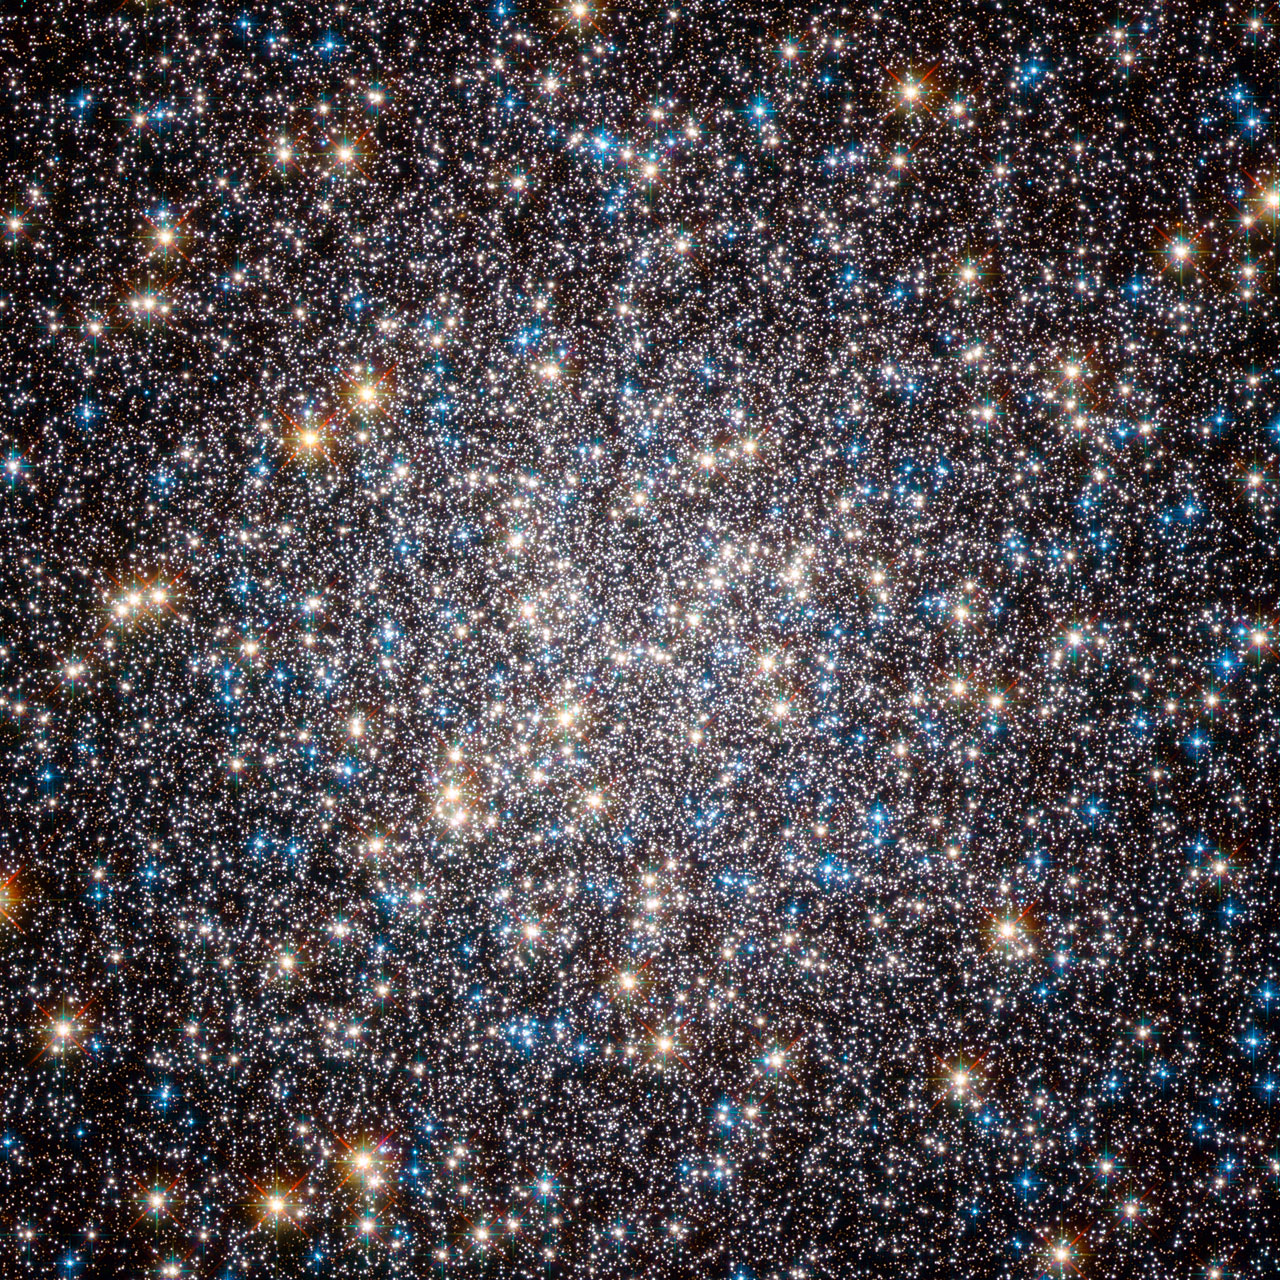 This image, taken by the Advanced Camera for Surveys on the Hubble Space Telescope, shows the core of the great globular cluster Messier 13 and provides an extraordinarily clear view of the hundreds of thousands of stars in the cluster, one of the brightest and best known in the sky. Just 25 000 light-years away and about 145 light-years in diameter, Messier 13 has drawn the eye since its discovery by Edmund Halley, the noted British astronomer, in 1714. The cluster lies in the constellation of Hercules and is so bright that under the right conditions it is even visible to the unaided eye. As Halley wrote: “This is but a little Patch, but it shews it self to the naked Eye, when the Sky is serene and the Moon absent.” Messier 13 was the target of a symbolic Arecibo radio telescope message that was sent in 1974, communicating humanity’s existence to possible extraterrestrial intelligences. However, more recent studies suggest that planets are very rare in the dense environments of globular clusters. Messier 13 has also appeared in literature. In his 1959 novel, The Sirens of Titan, Kurt Vonnegut wrote “Every passing hour brings the Solar System forty-three thousand miles closer to Globular Cluster M13 in Hercules — and still there are some misfits who insist that there is no such thing as progress.” The step from Halley’s early telescopic view to this Hubble image indicates some measure of the progress in astronomy in the last three hundred years. This picture was created from images taken with the Wide Field Channel of the Advanced Camera for Surveys on the Hubble Space Telescope. Data through a blue filter (F435W) are coloured blue, data through a red filter (F625W) are coloured green and near-infrared data (through the F814W filter) are coloured red. The exposure times are 1480 s, 380 s and 567 s respectively and the field of view is about 2.5 arcminutes across.